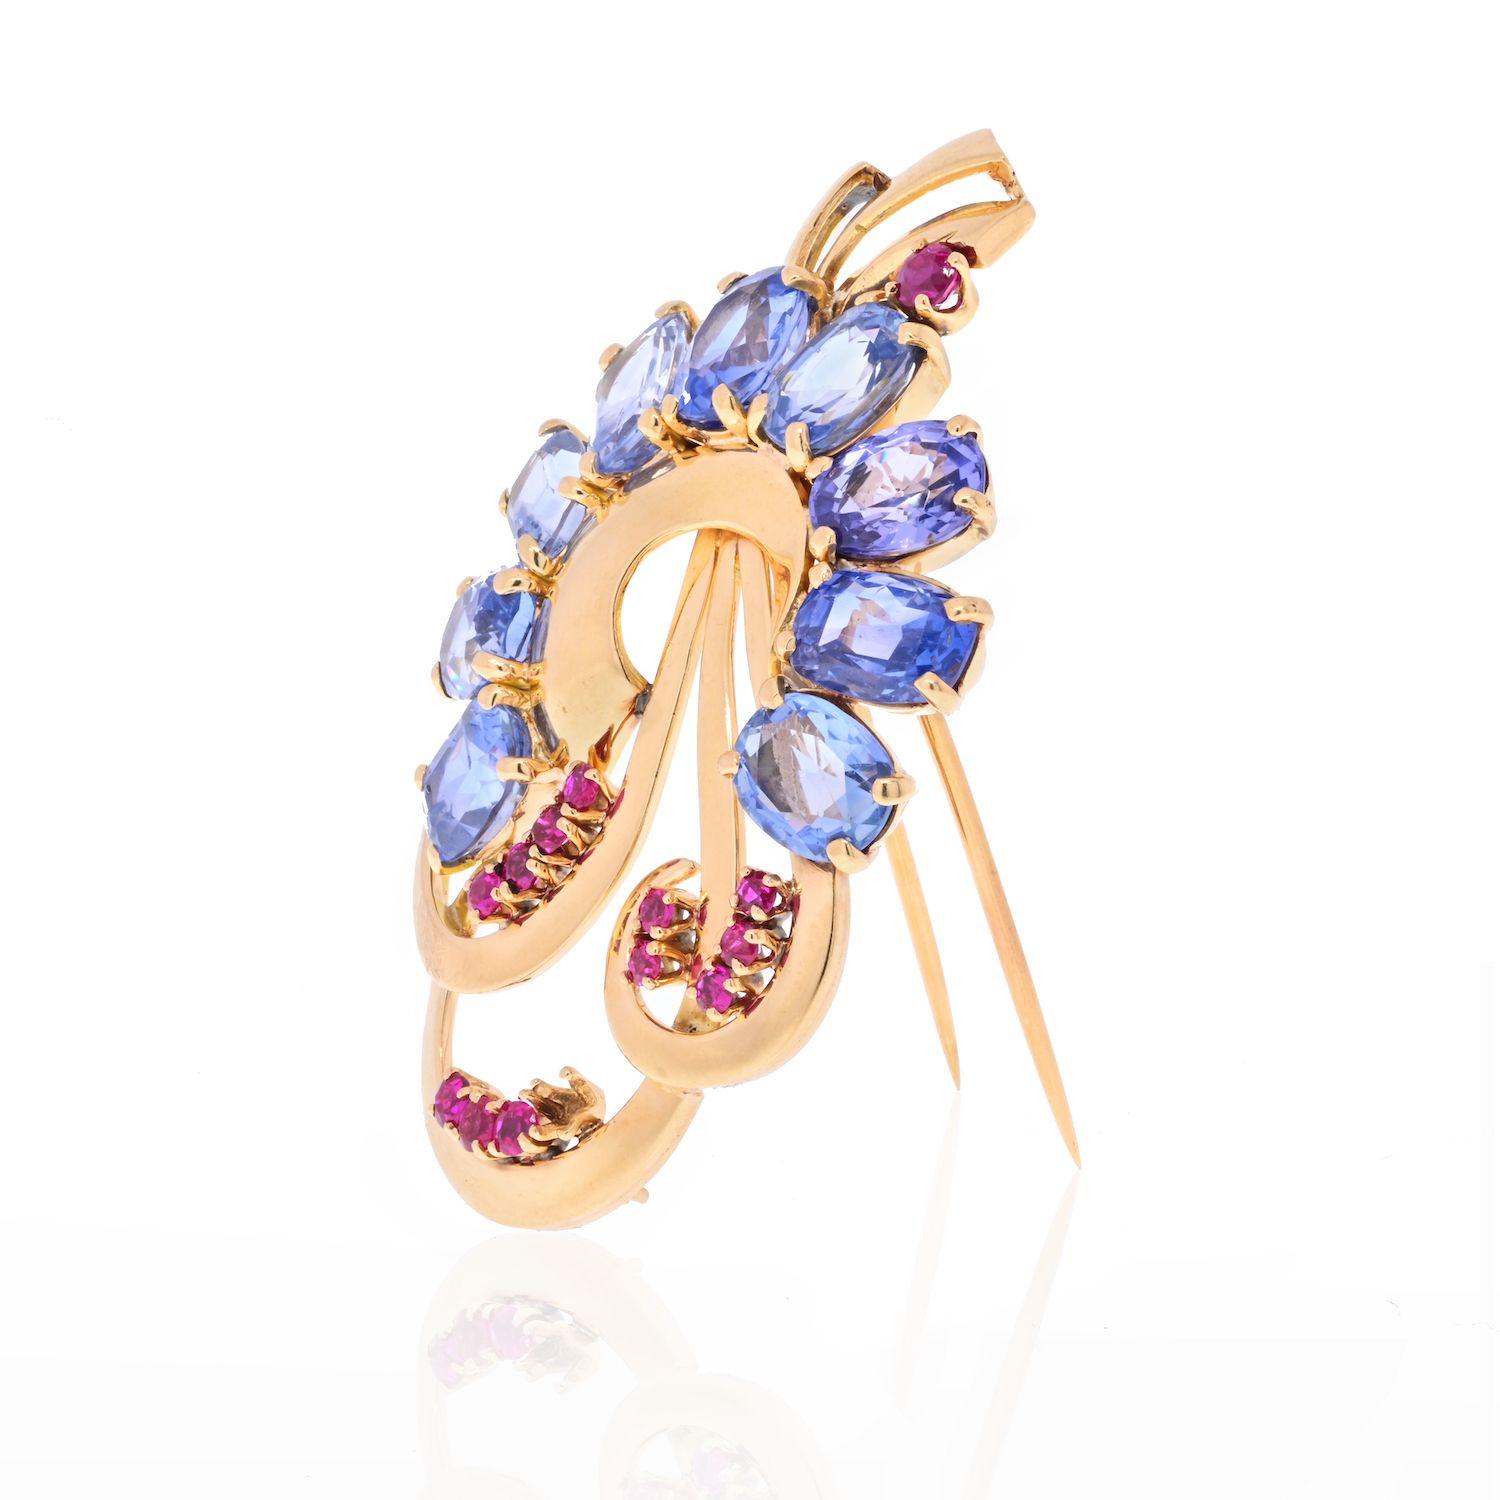 Made by one of the most influential jewelry designers of the early twentieth century, Raymond C. Yard this exciting brooch is as beautiful today as it was 80 years ago!
Crafted in 14K Rose Gold mounte with cushion cut sapphires and round cut rubies